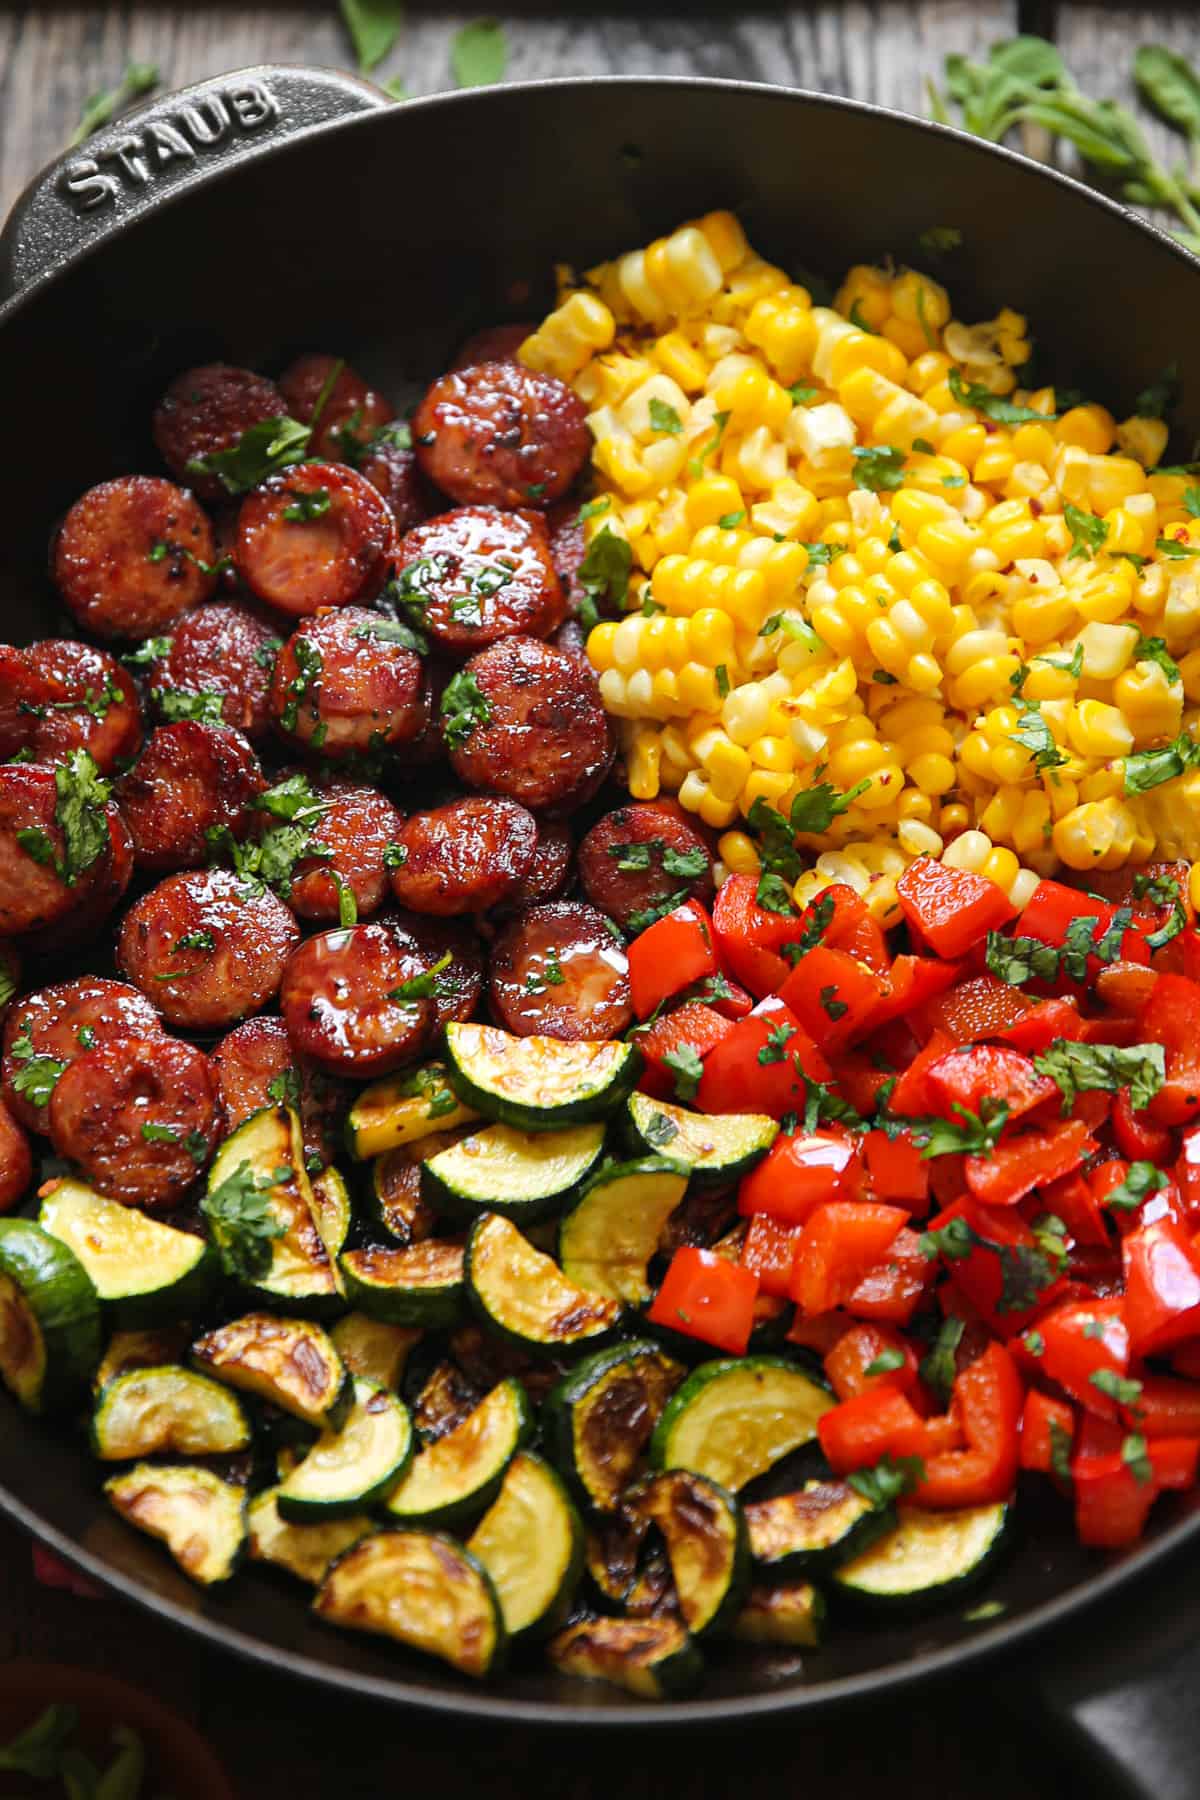 Sausage and Veggies Cast-Iron Skillet with Bell Peppers, Zucchini, and Corn